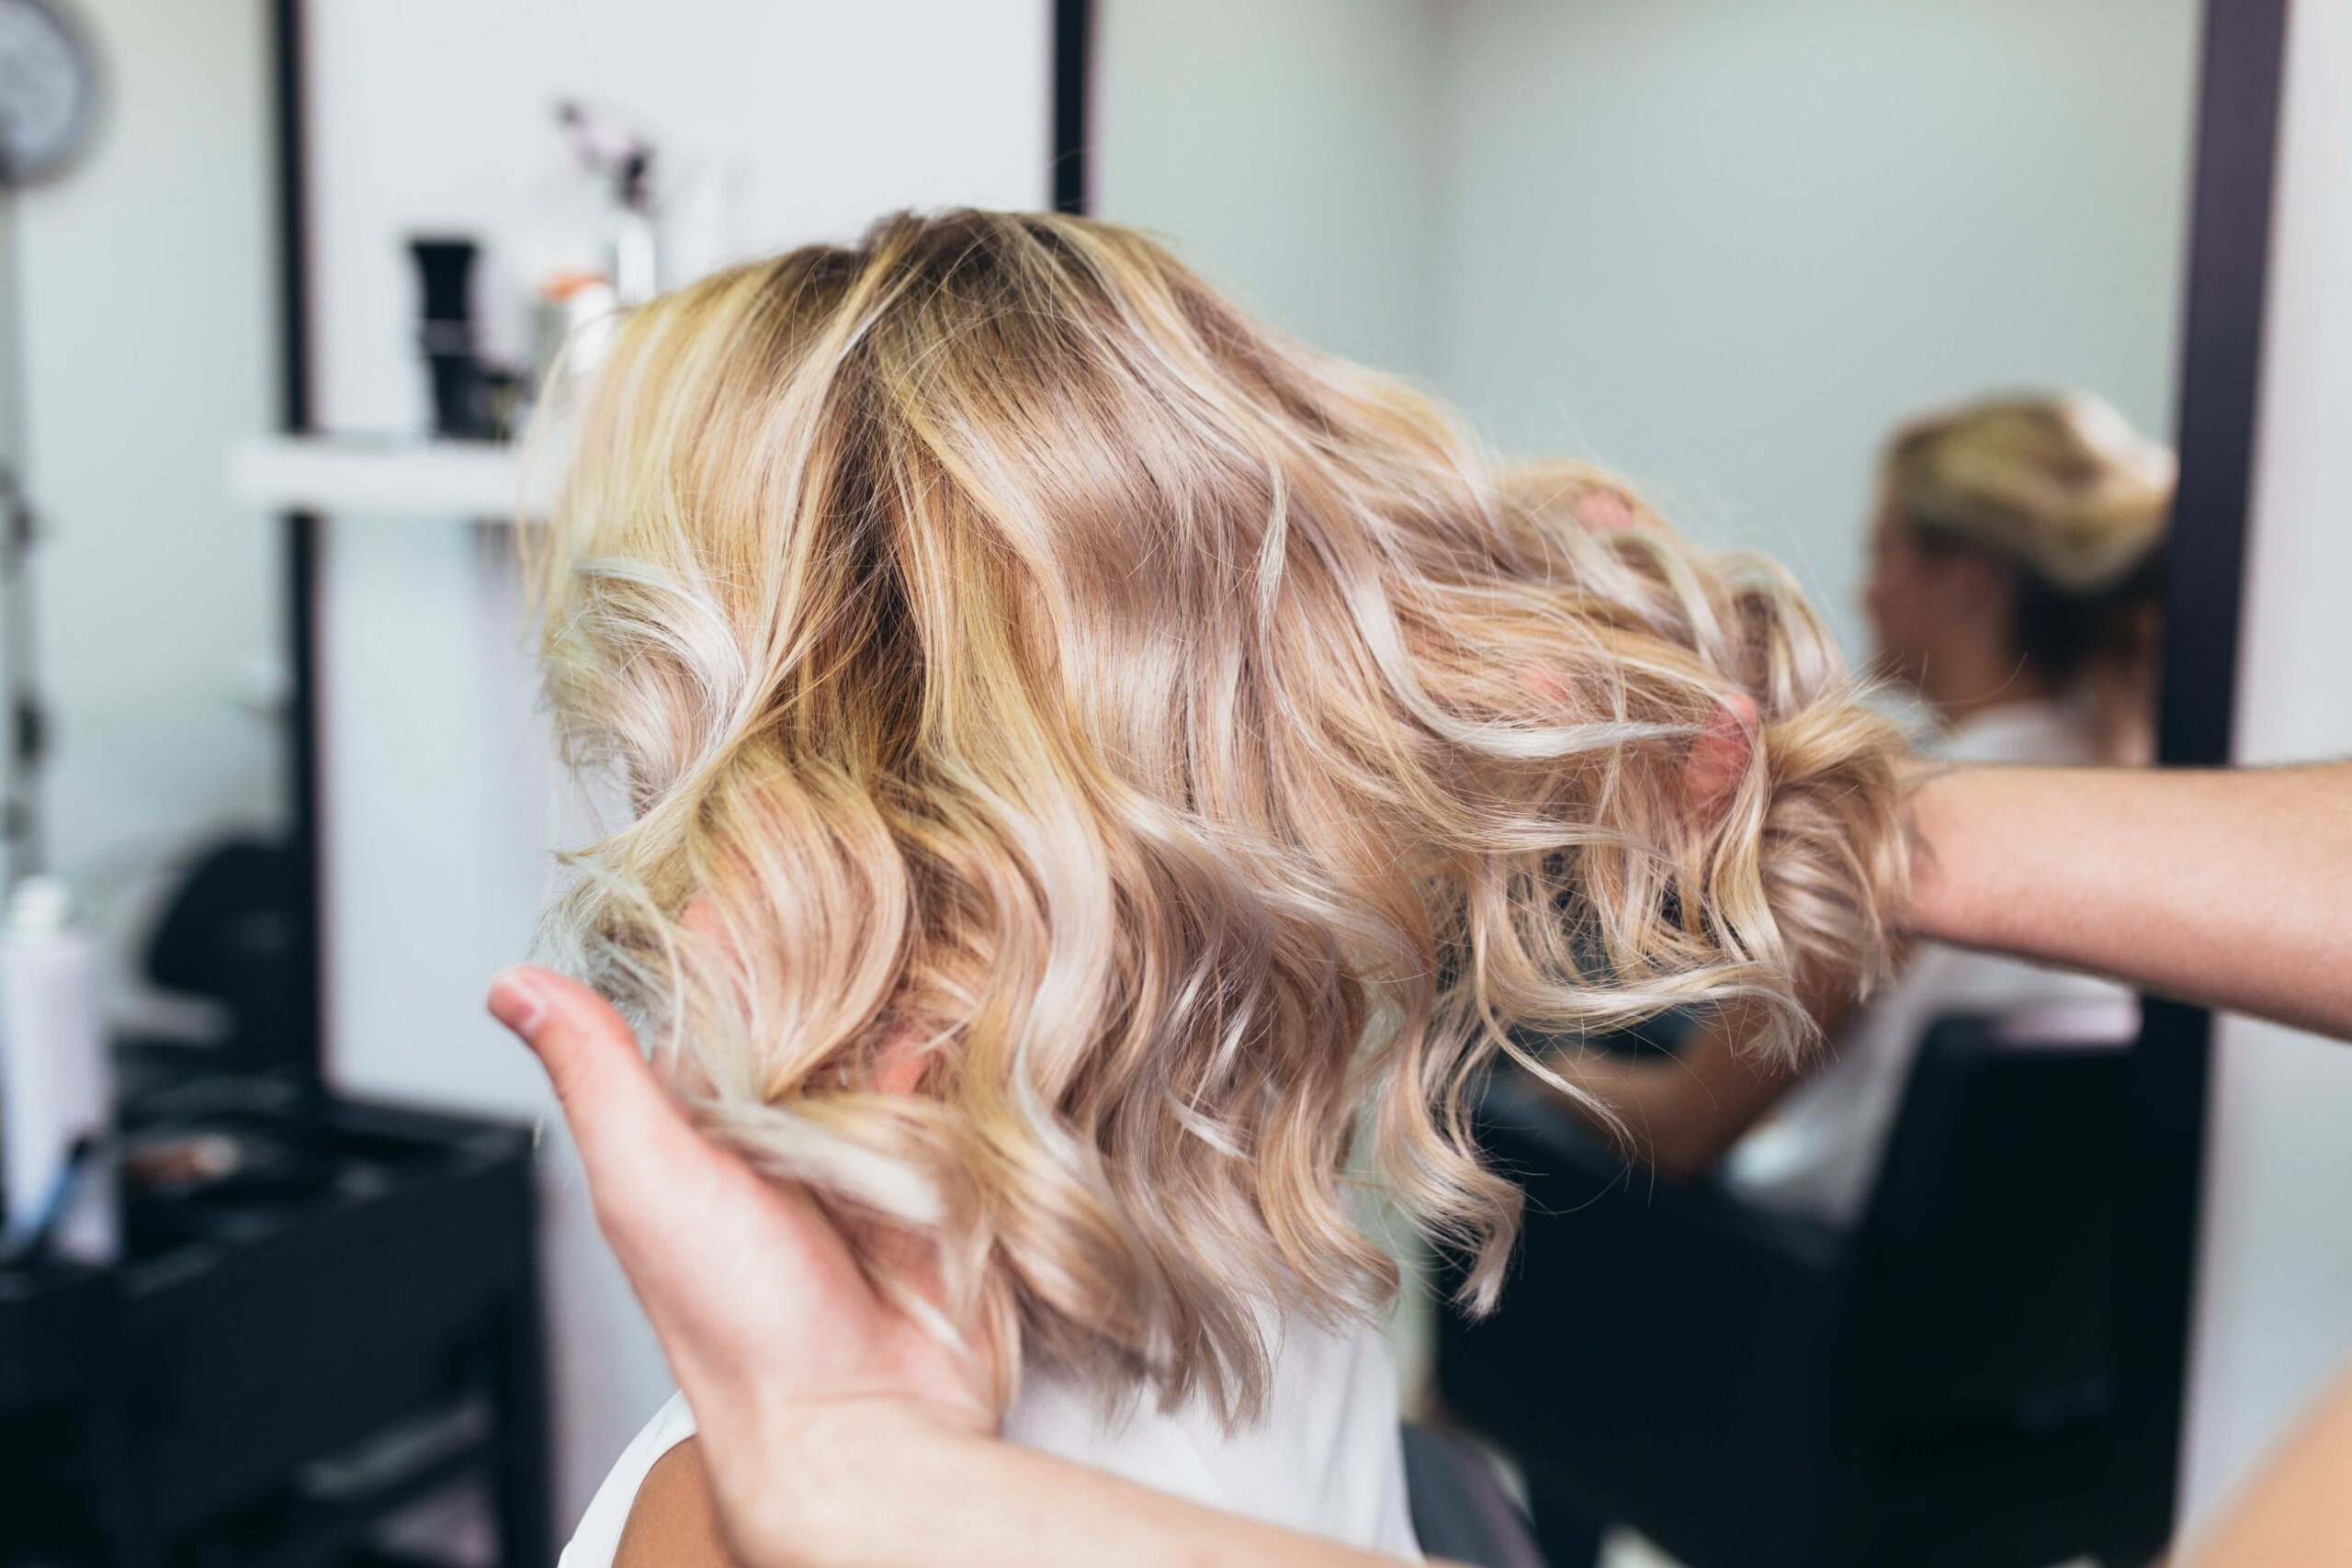 Partial Balayage vs. Full Balayage: Which Is Right For You?